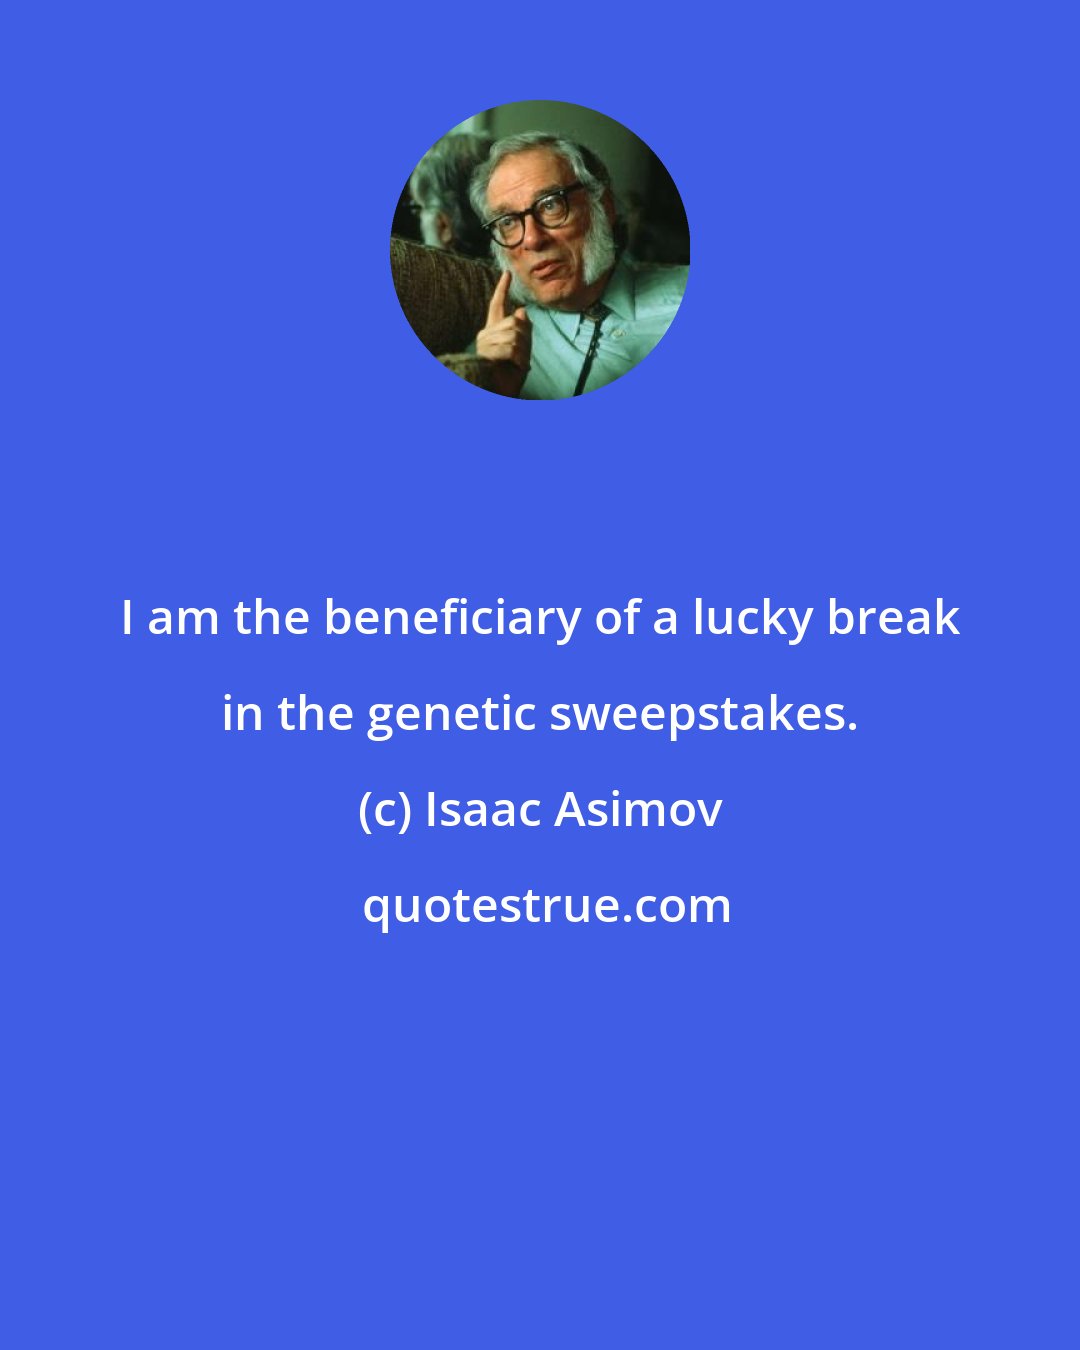 Isaac Asimov: I am the beneficiary of a lucky break in the genetic sweepstakes.